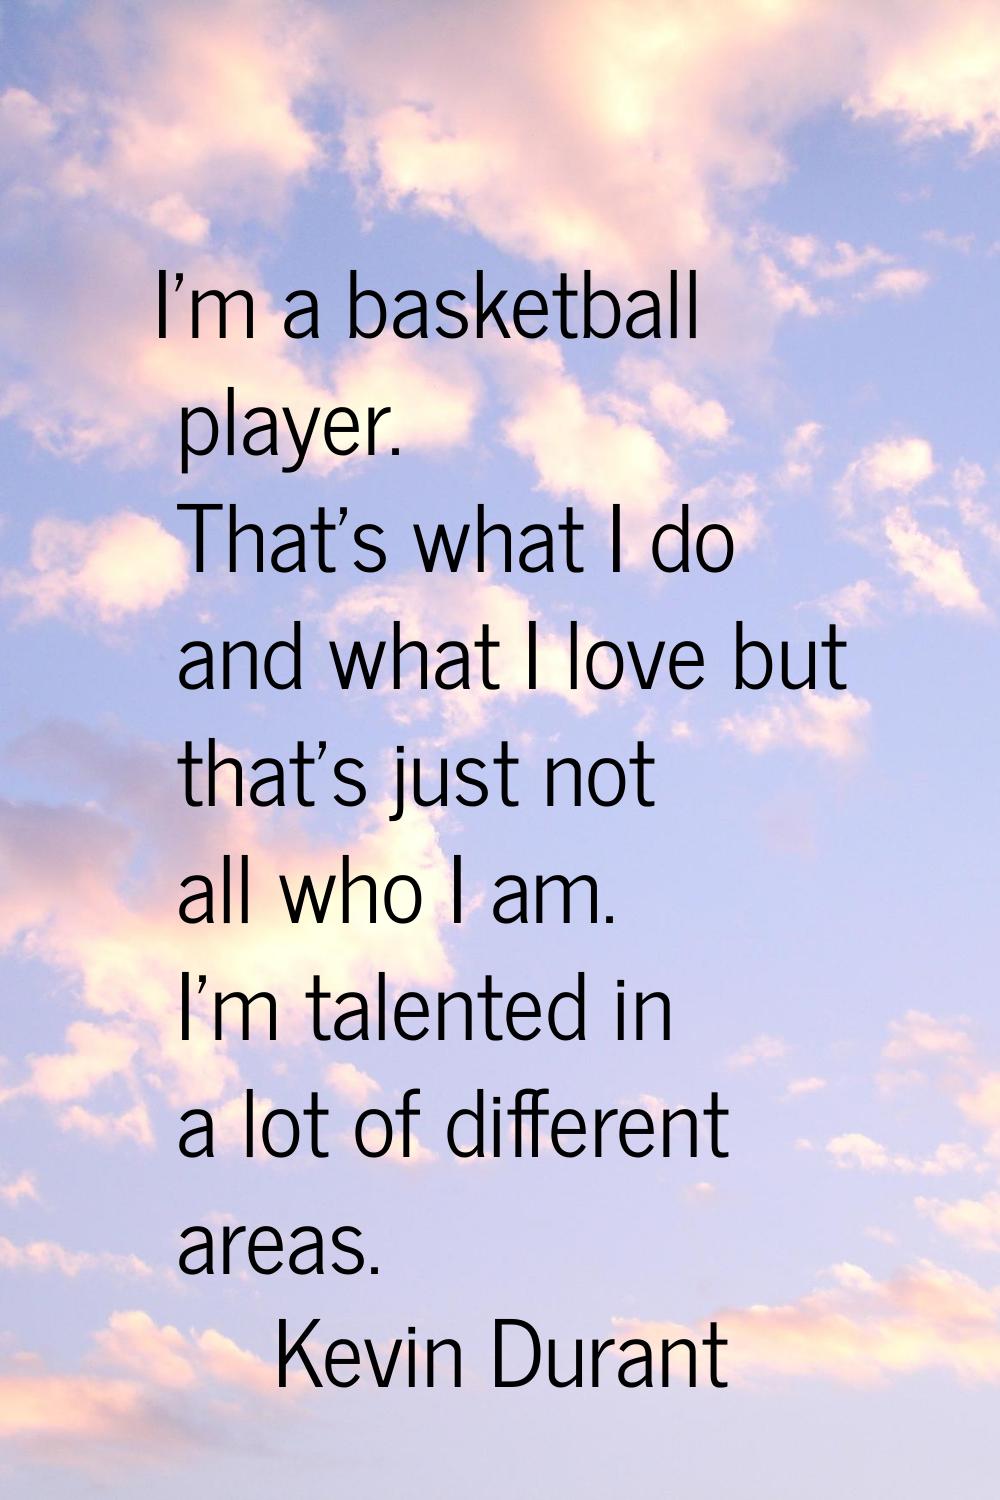 I'm a basketball player. That's what I do and what I love but that's just not all who I am. I'm tal